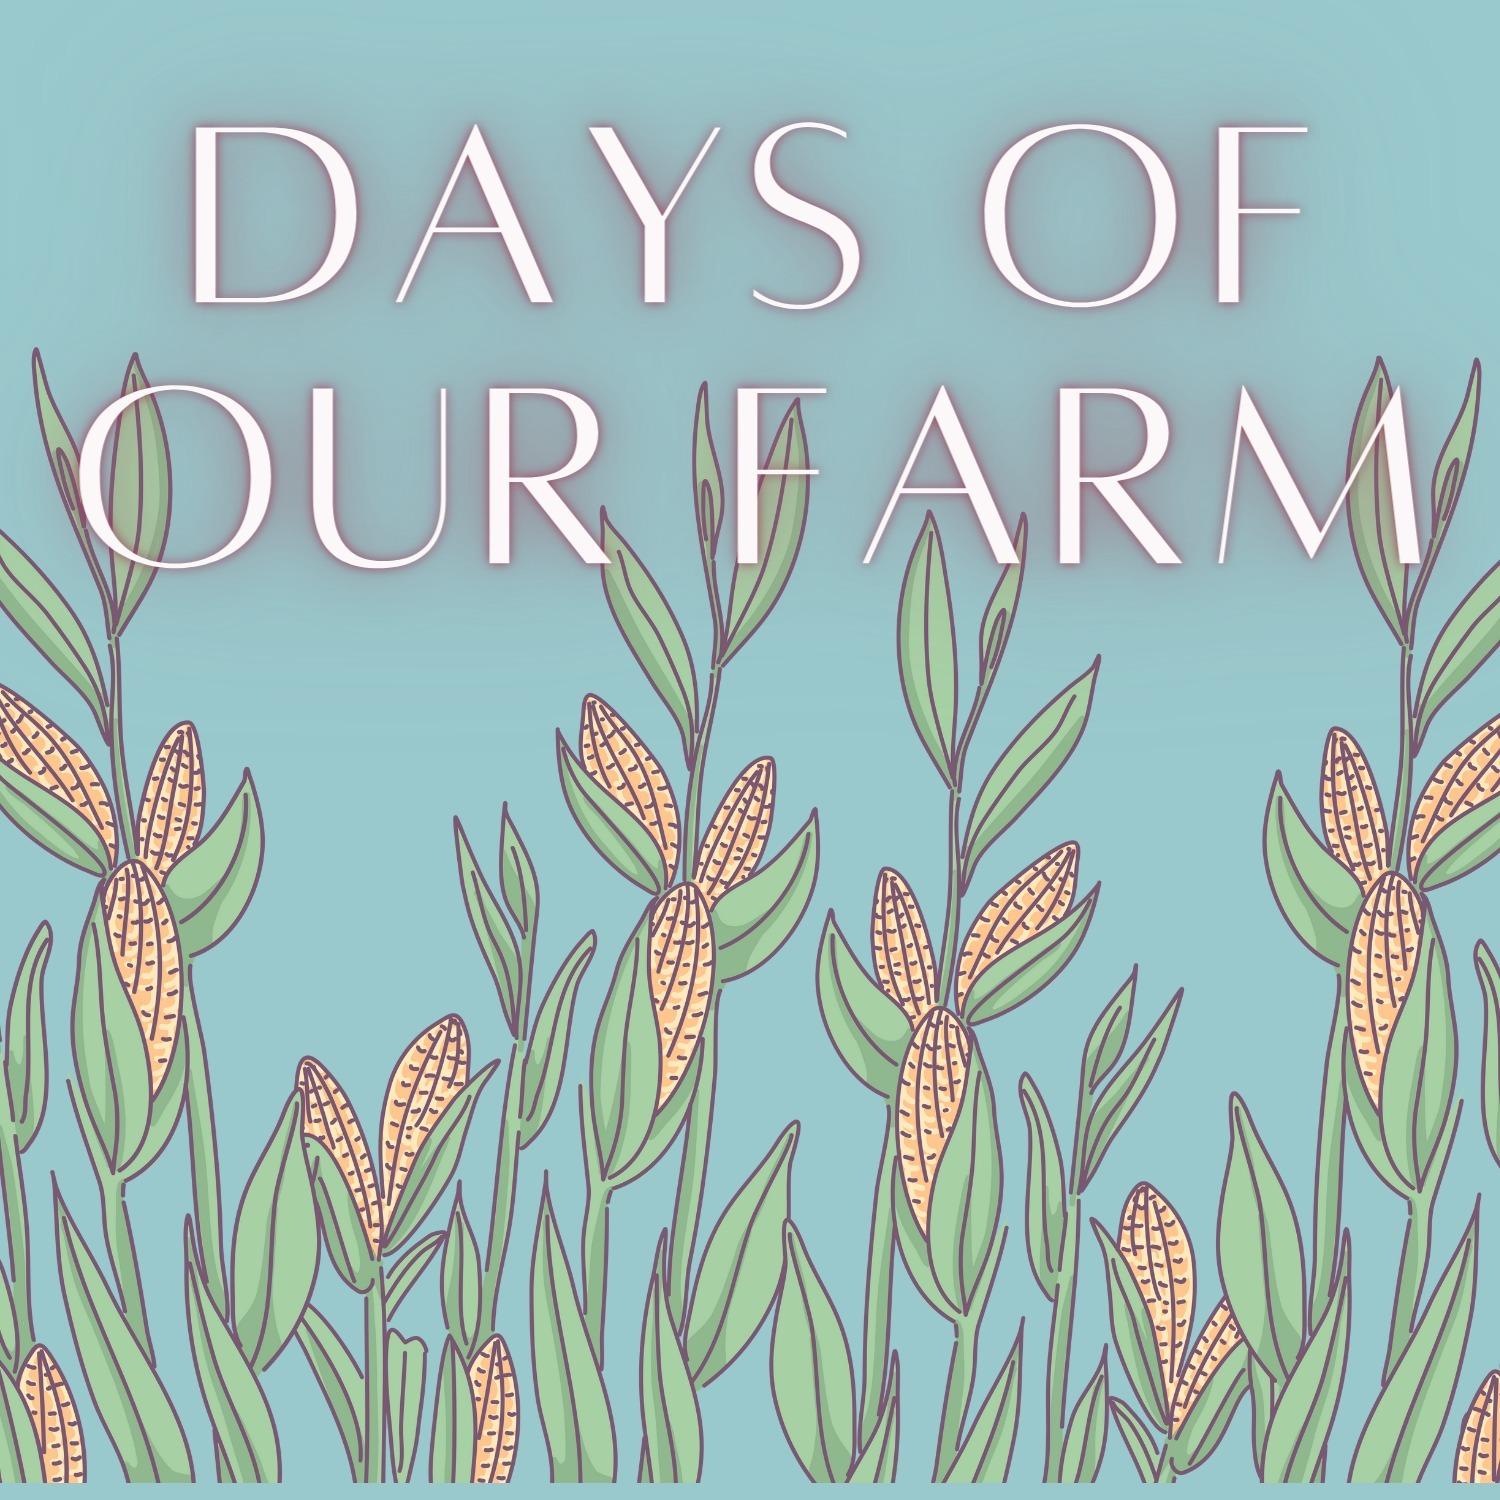 Days of our Farm